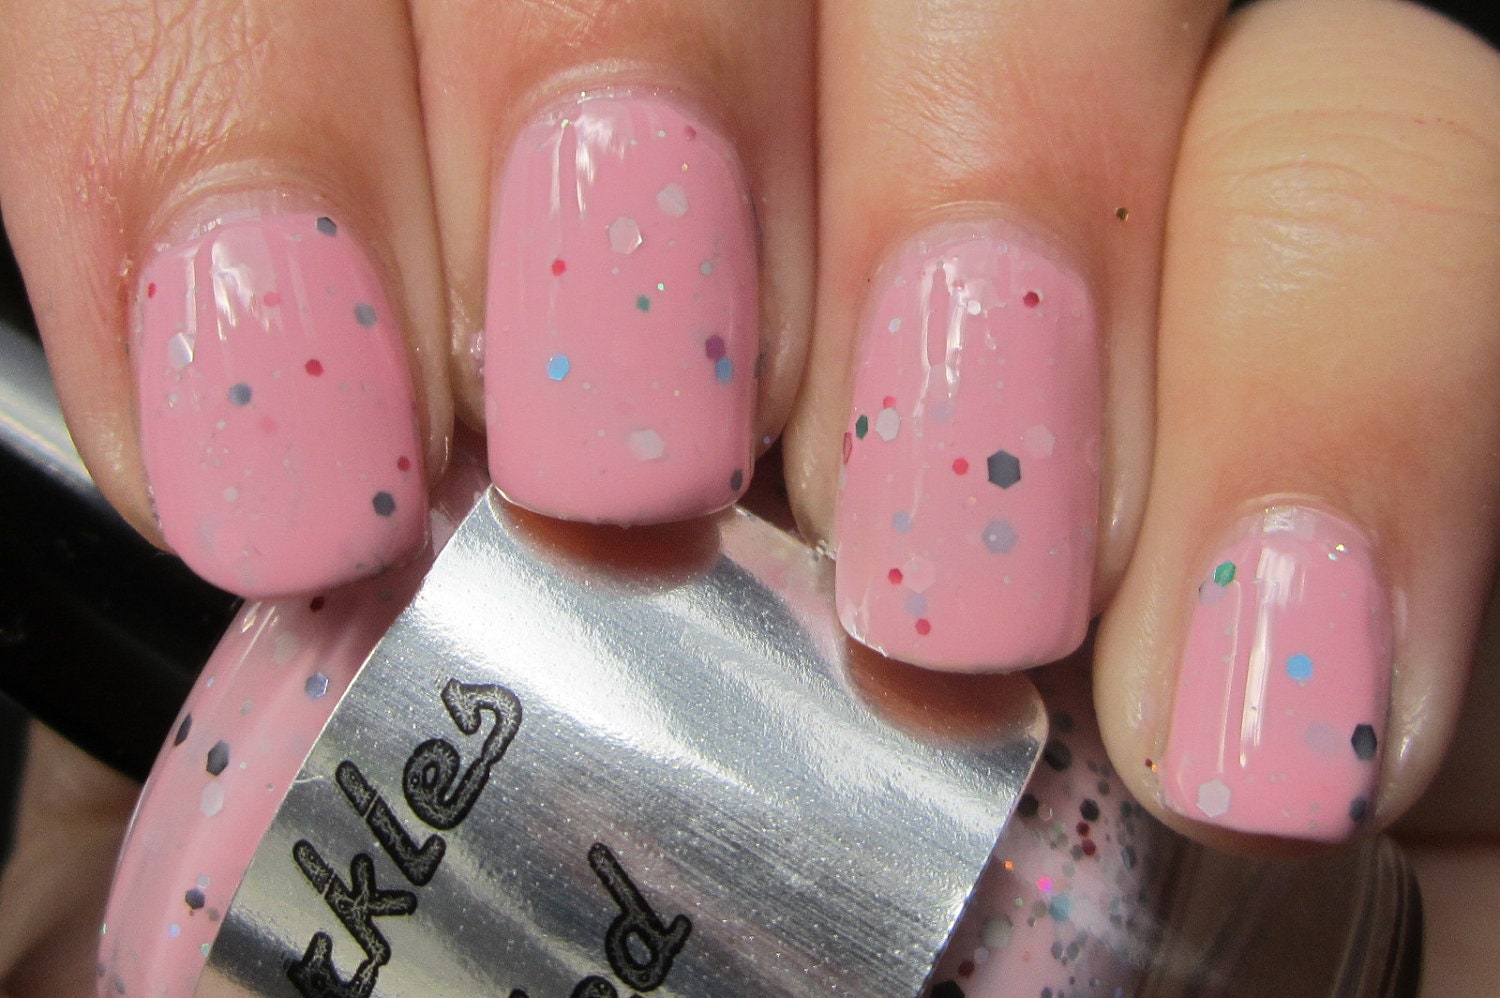 Speckled Nails